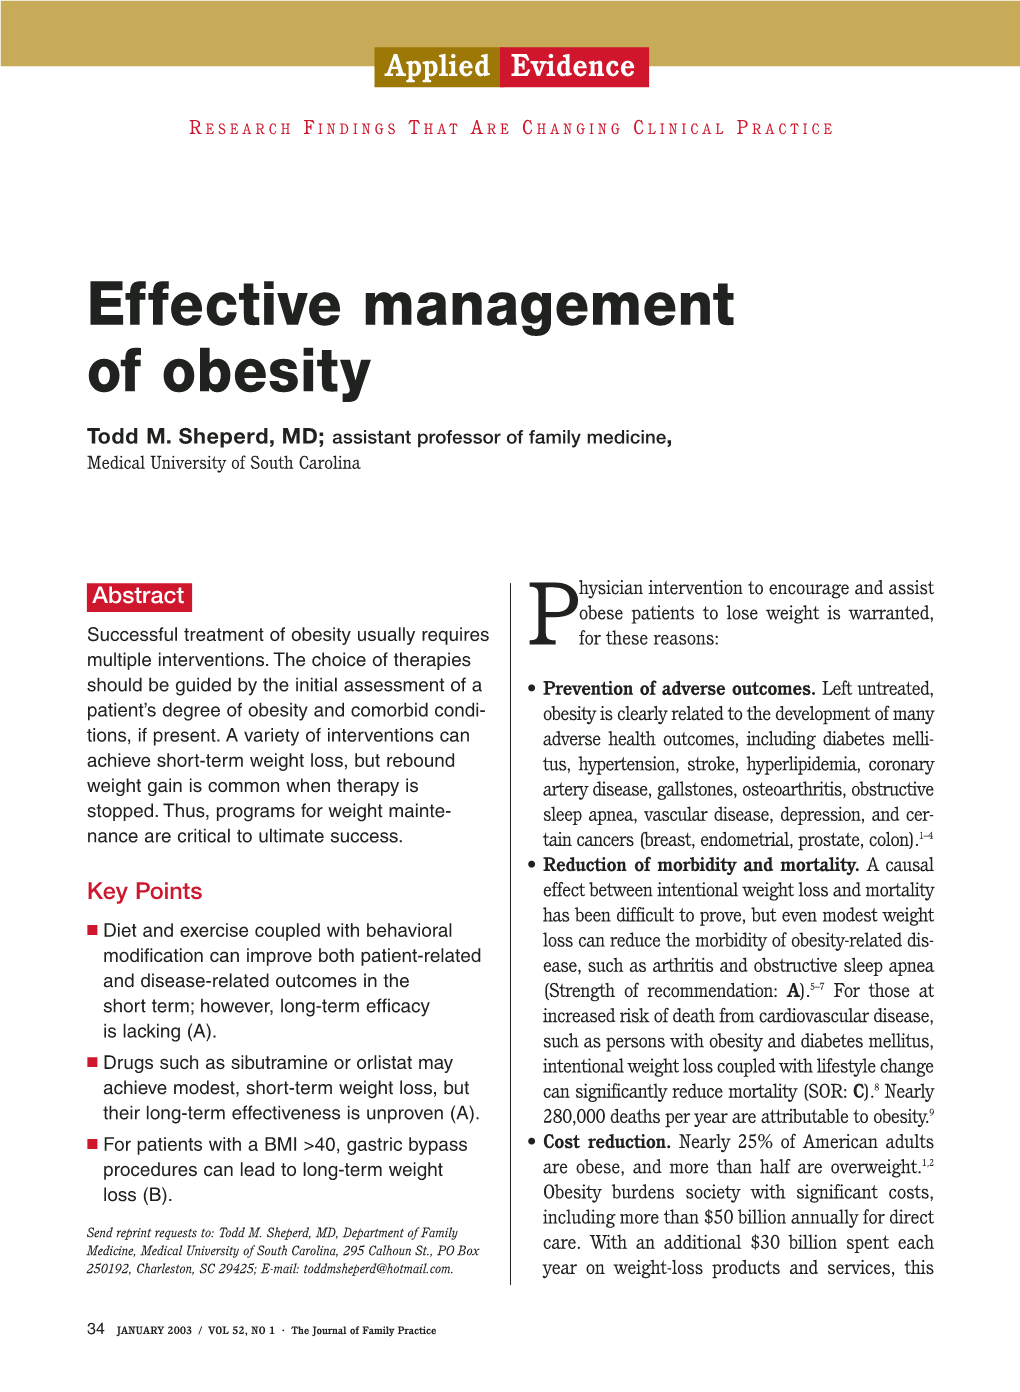 Effective Management of Obesity